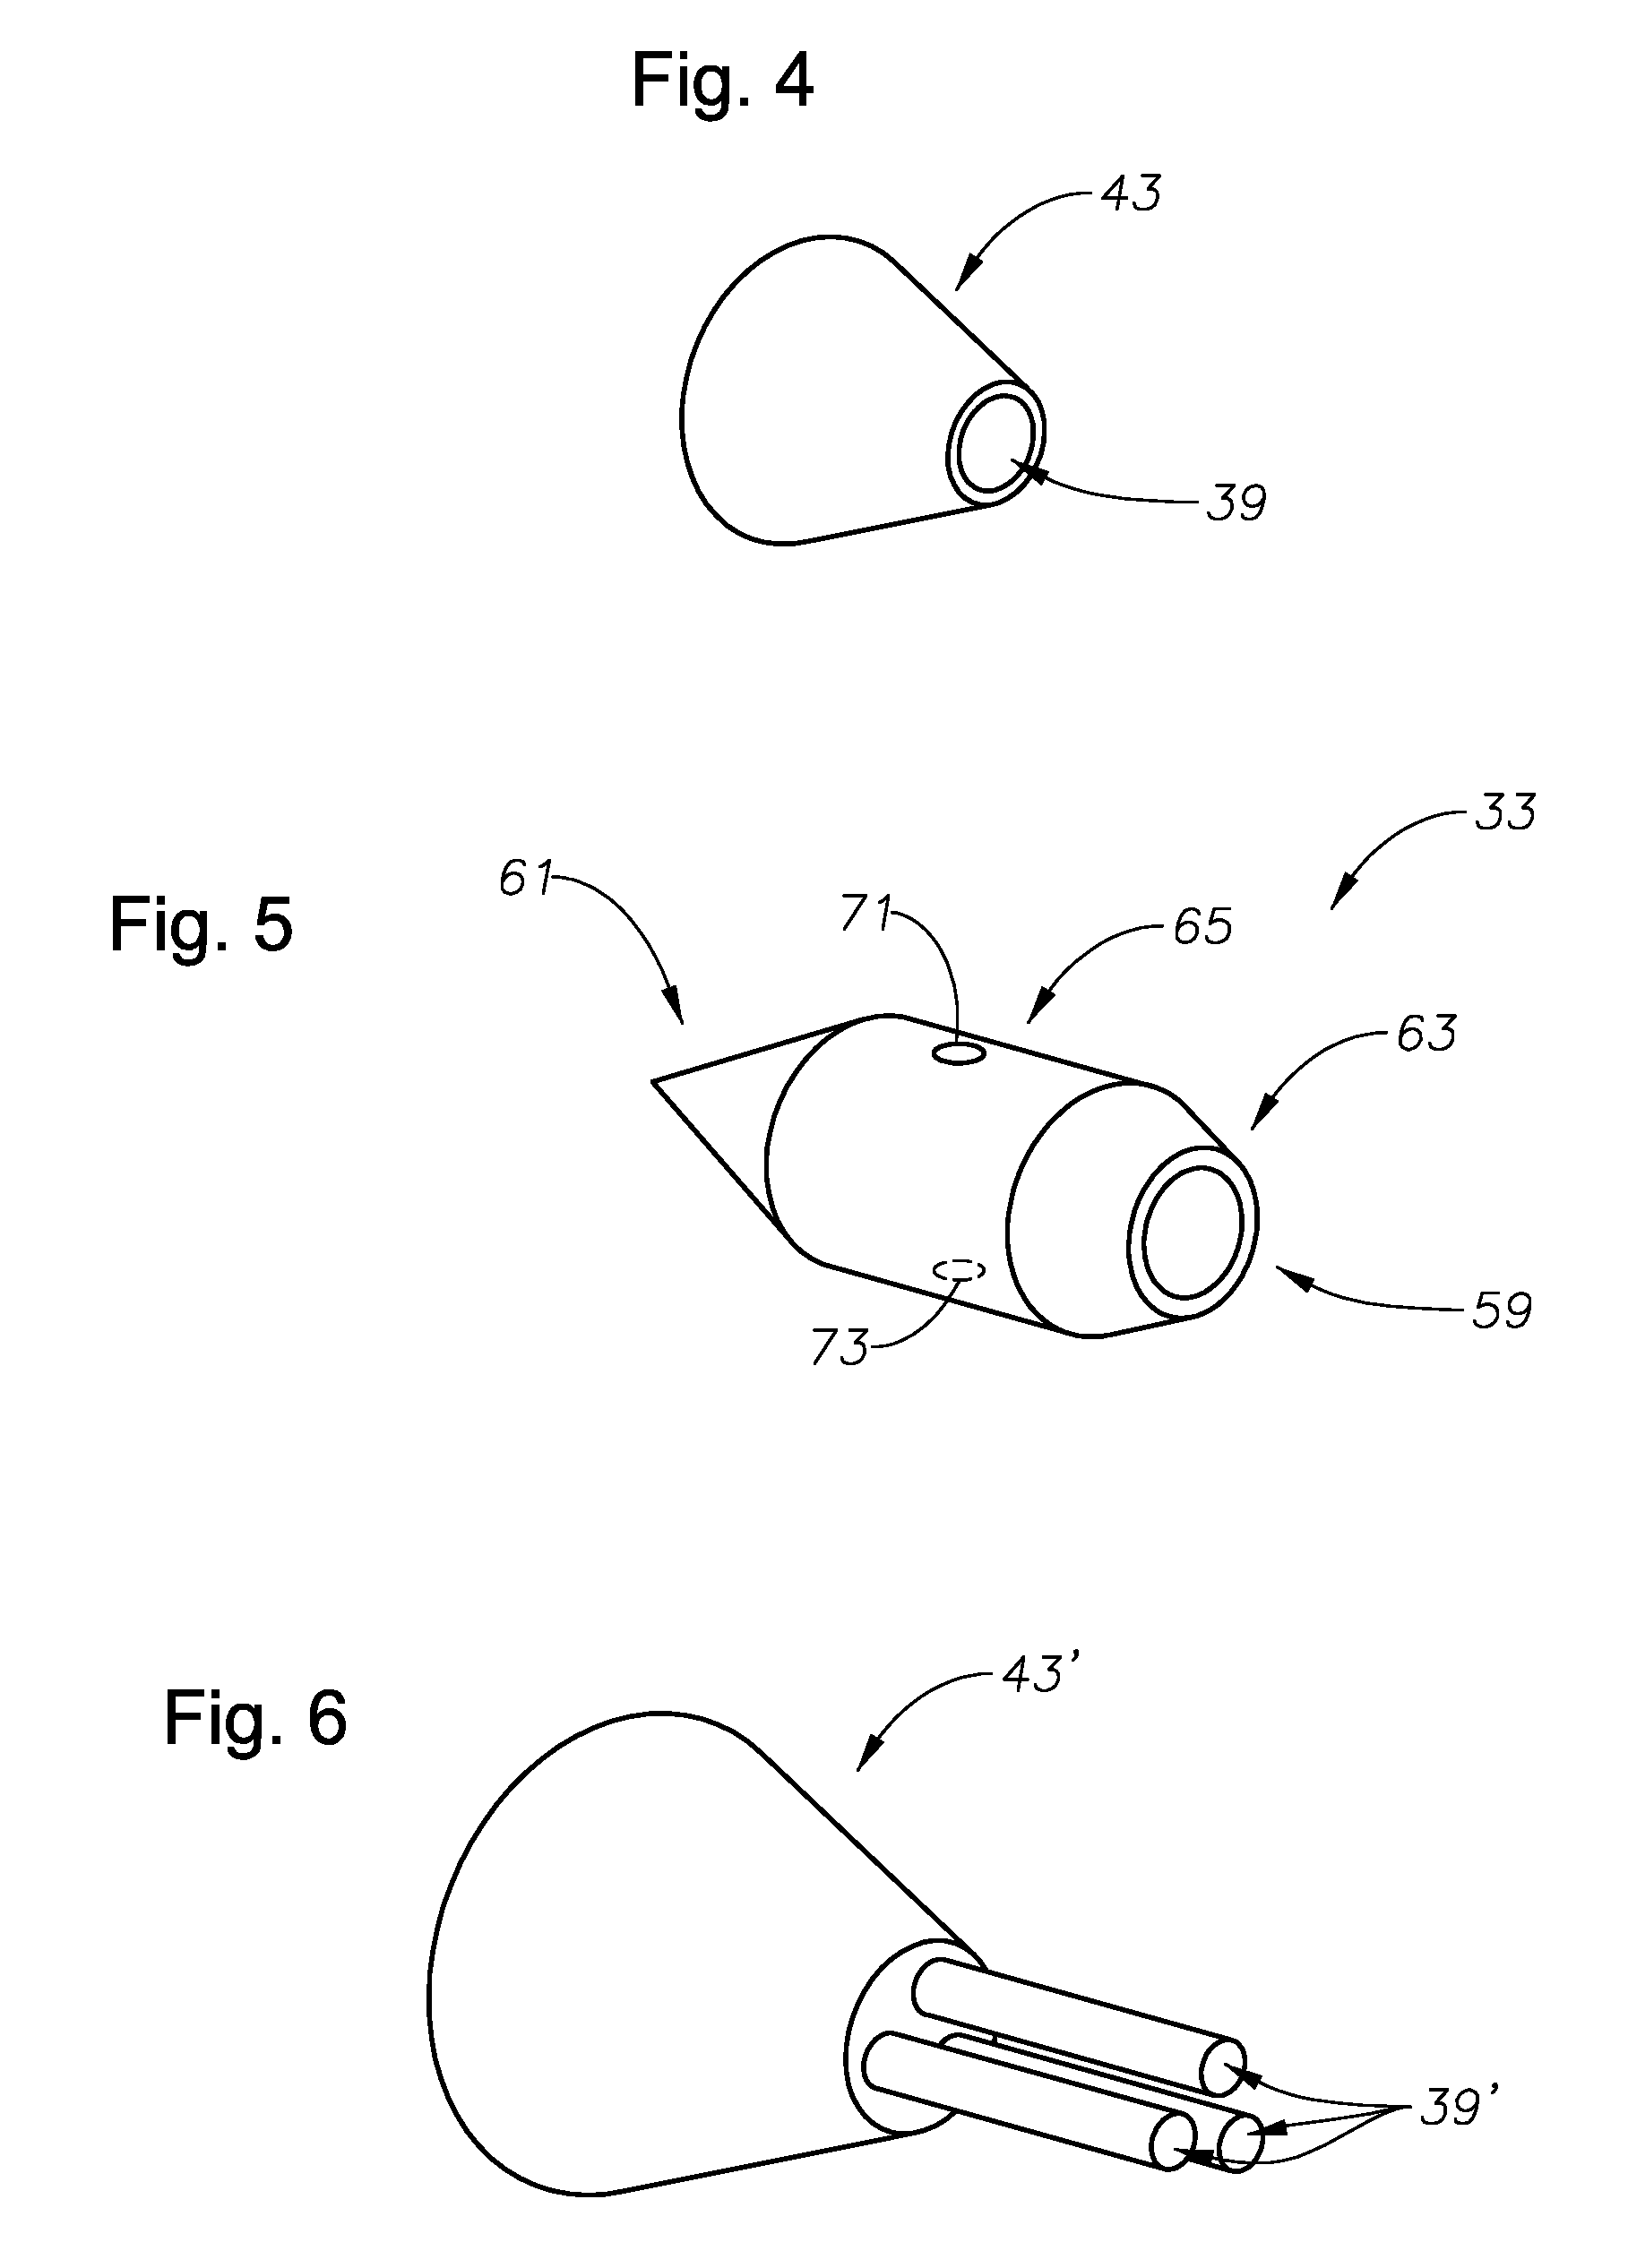 Pulse detonation/deflagration apparatus and related methods for enhancing DDT wave production